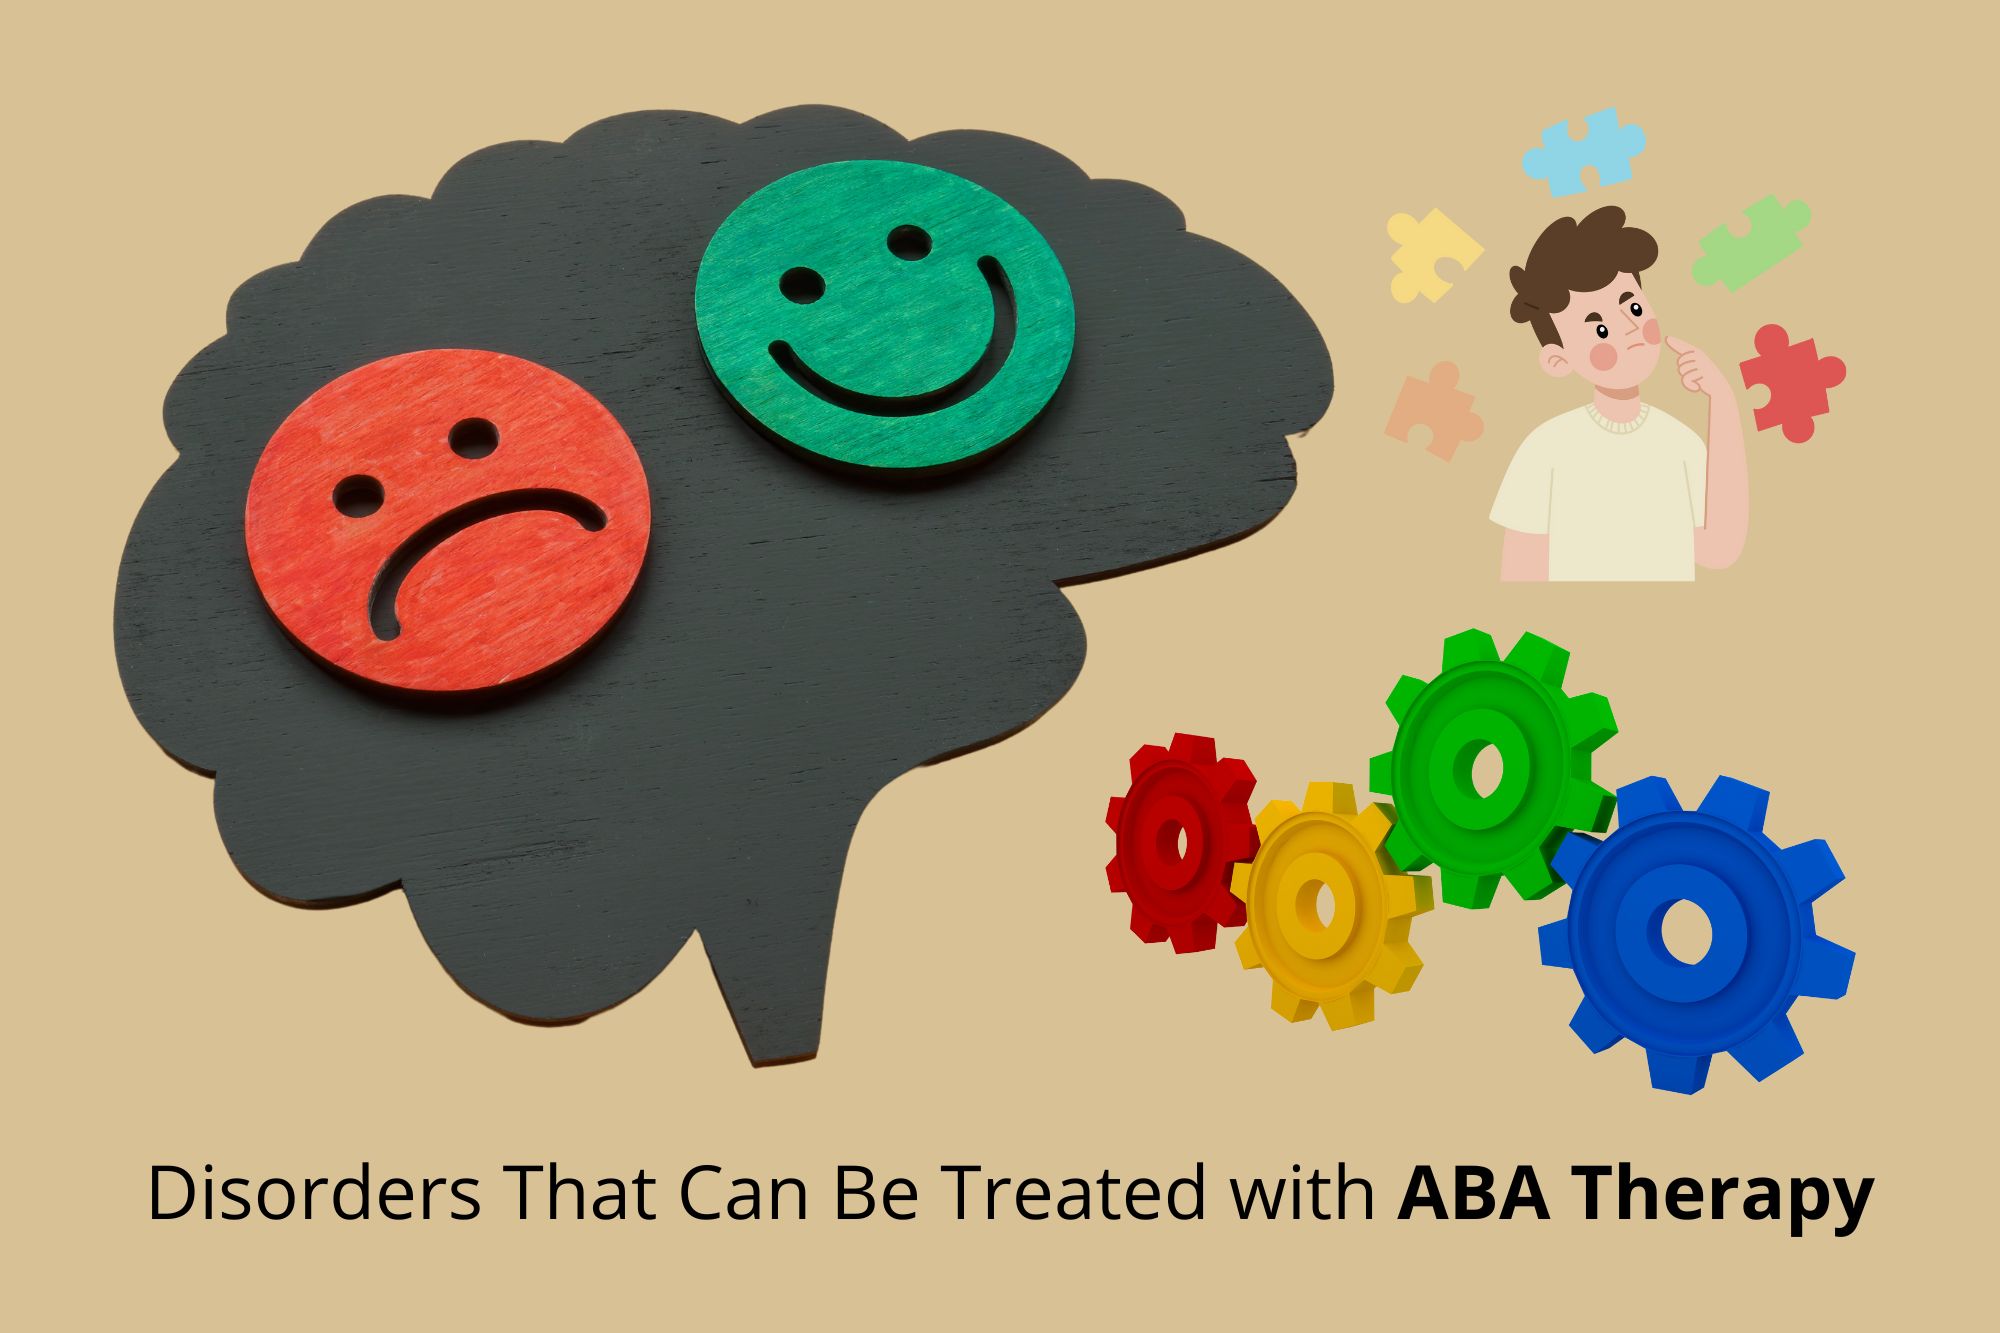 Disorders That Can Be Treated with ABA Therapy